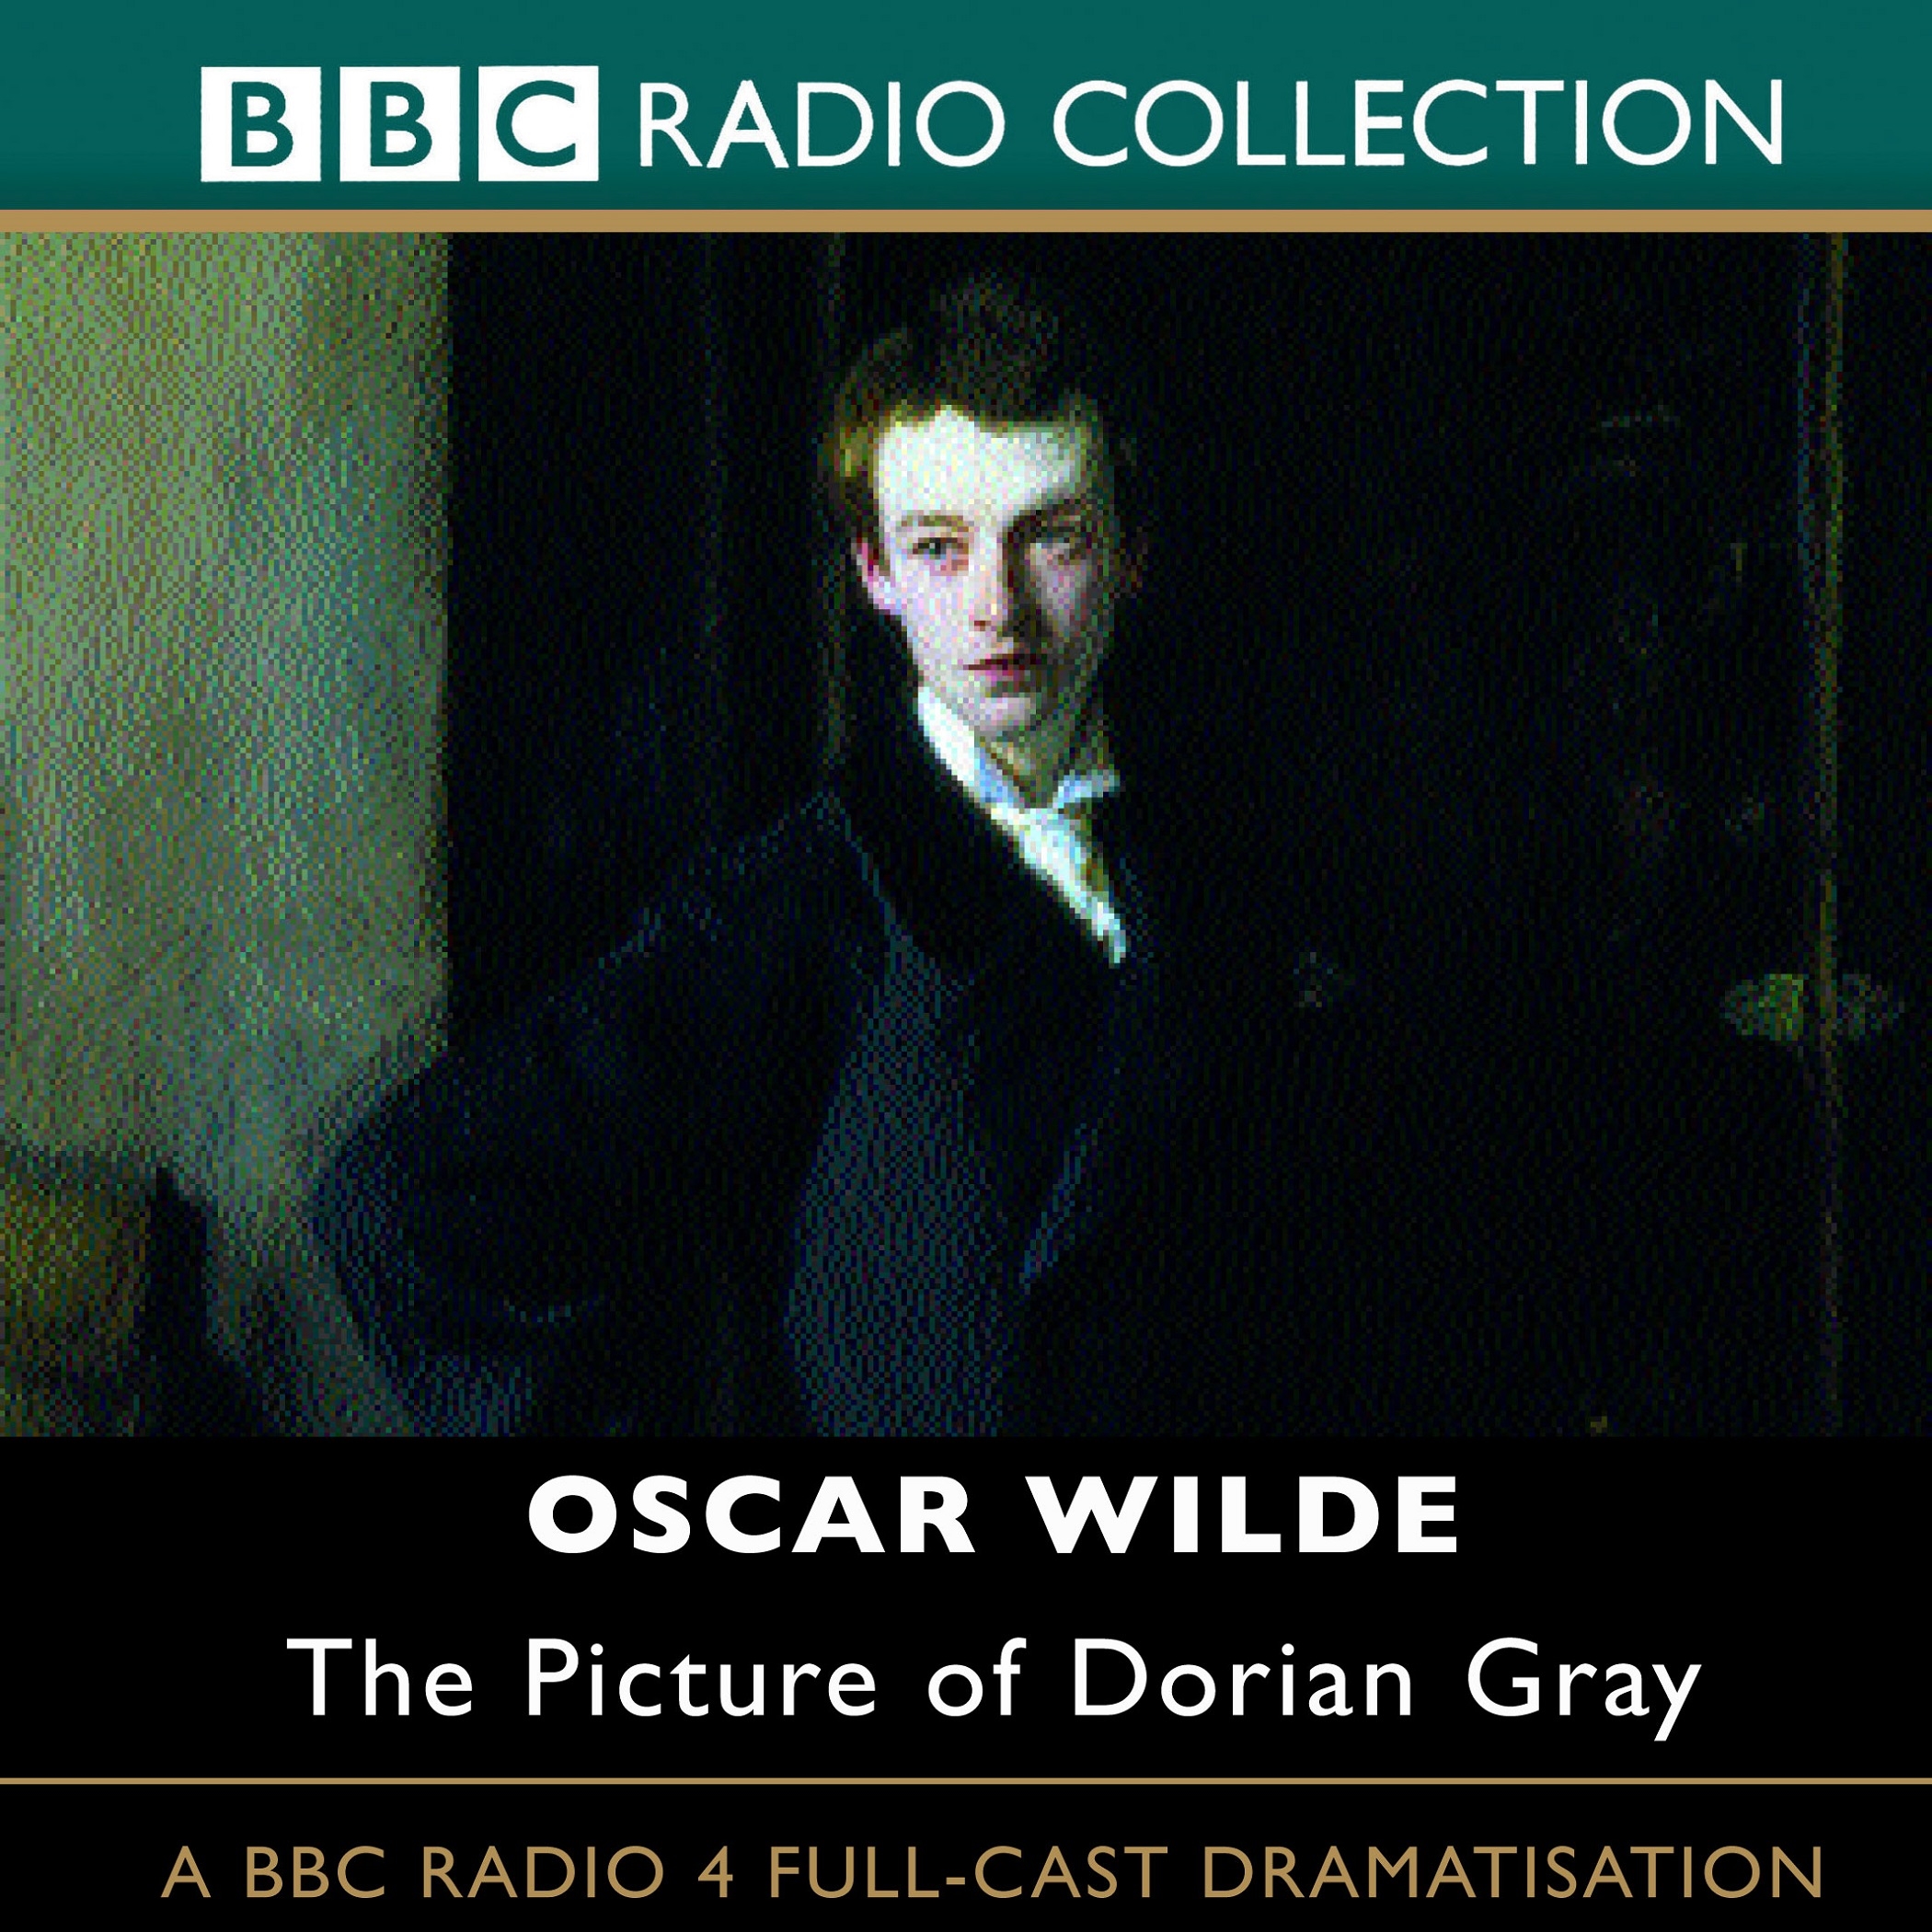 research paper on the picture of dorian gray